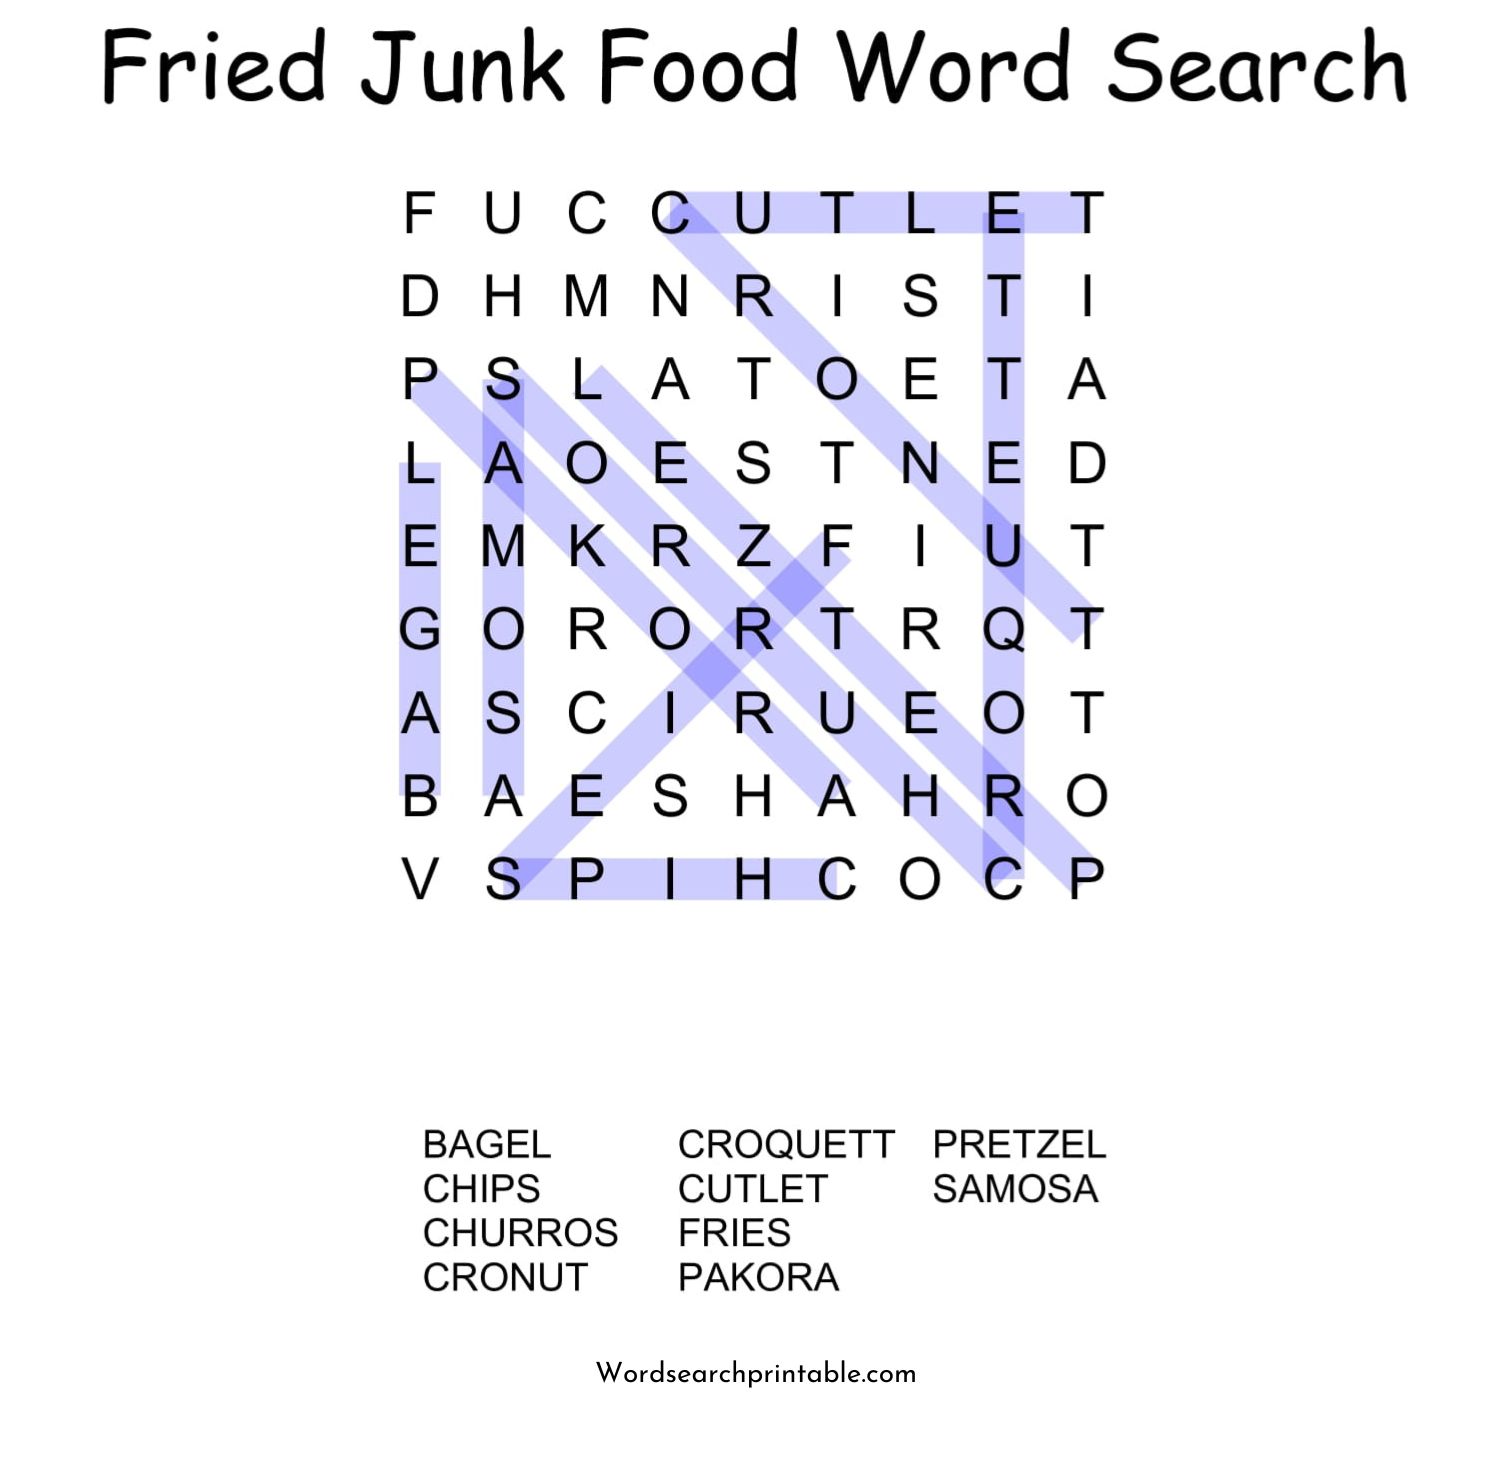 fried junk food word search puzzle solution